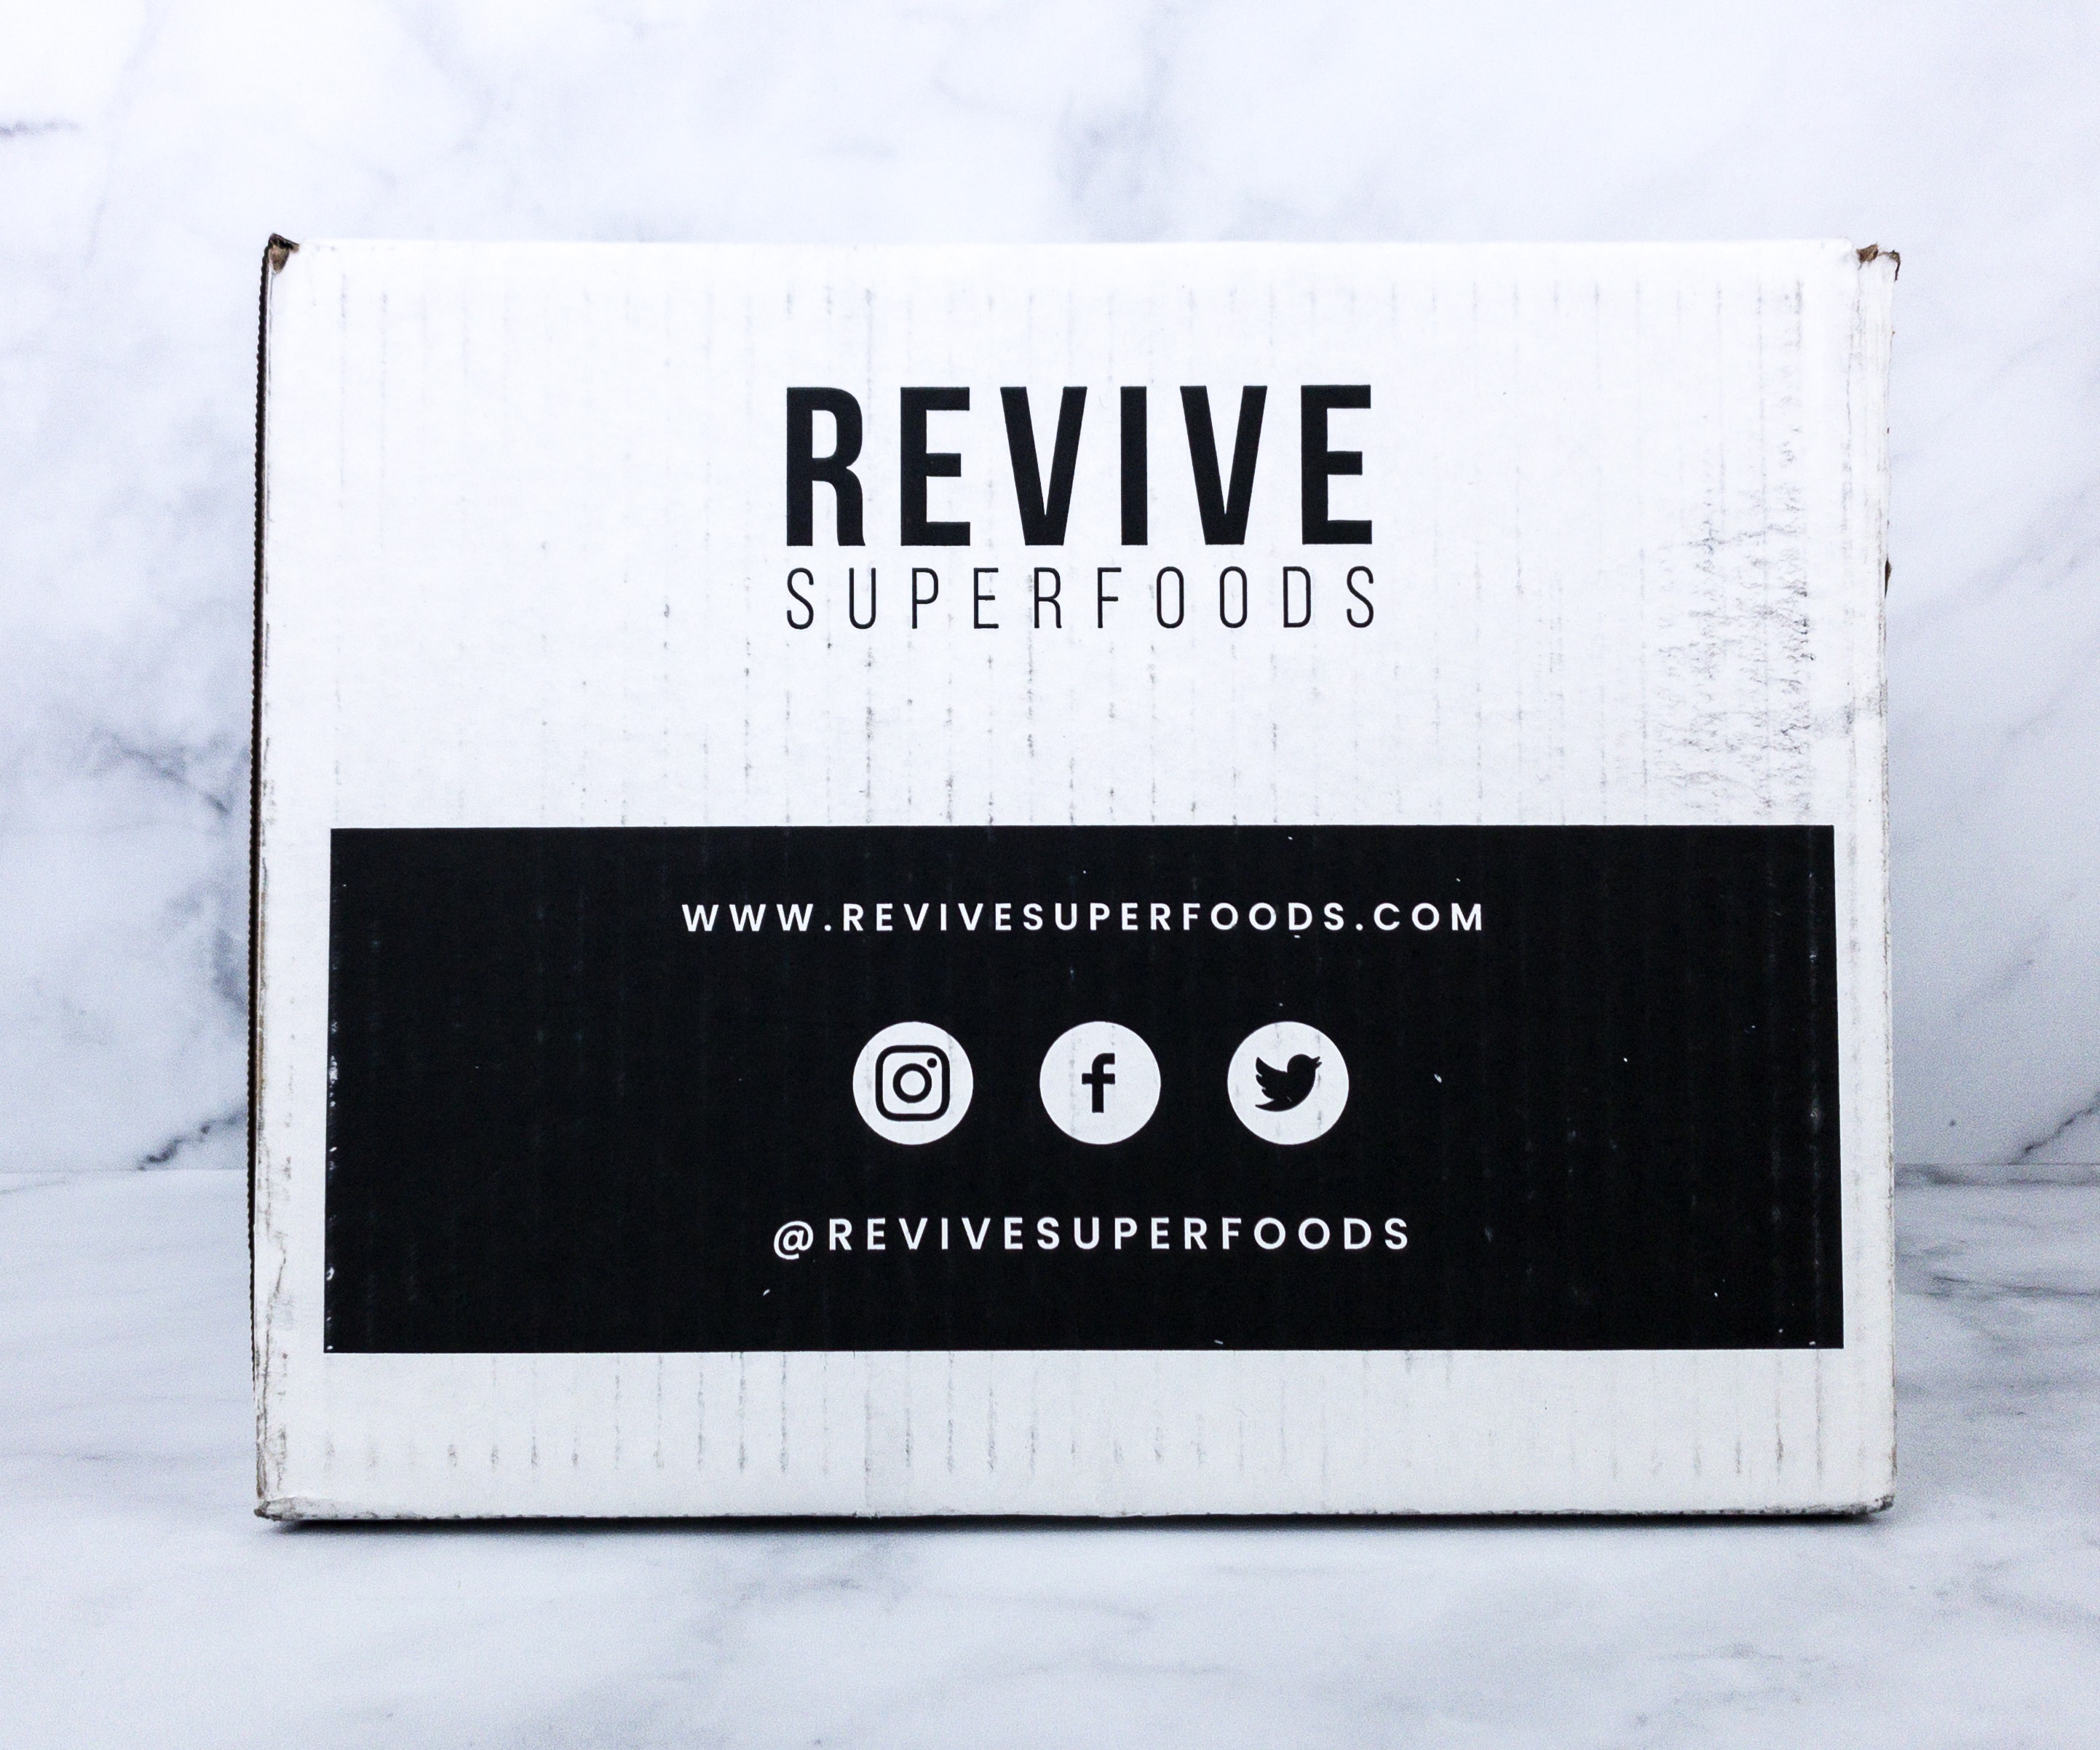 https://hellosubscription.com/wp-content/uploads/2020/03/30204212/revive-superfoods-march-2020-1.jpg?quality=100